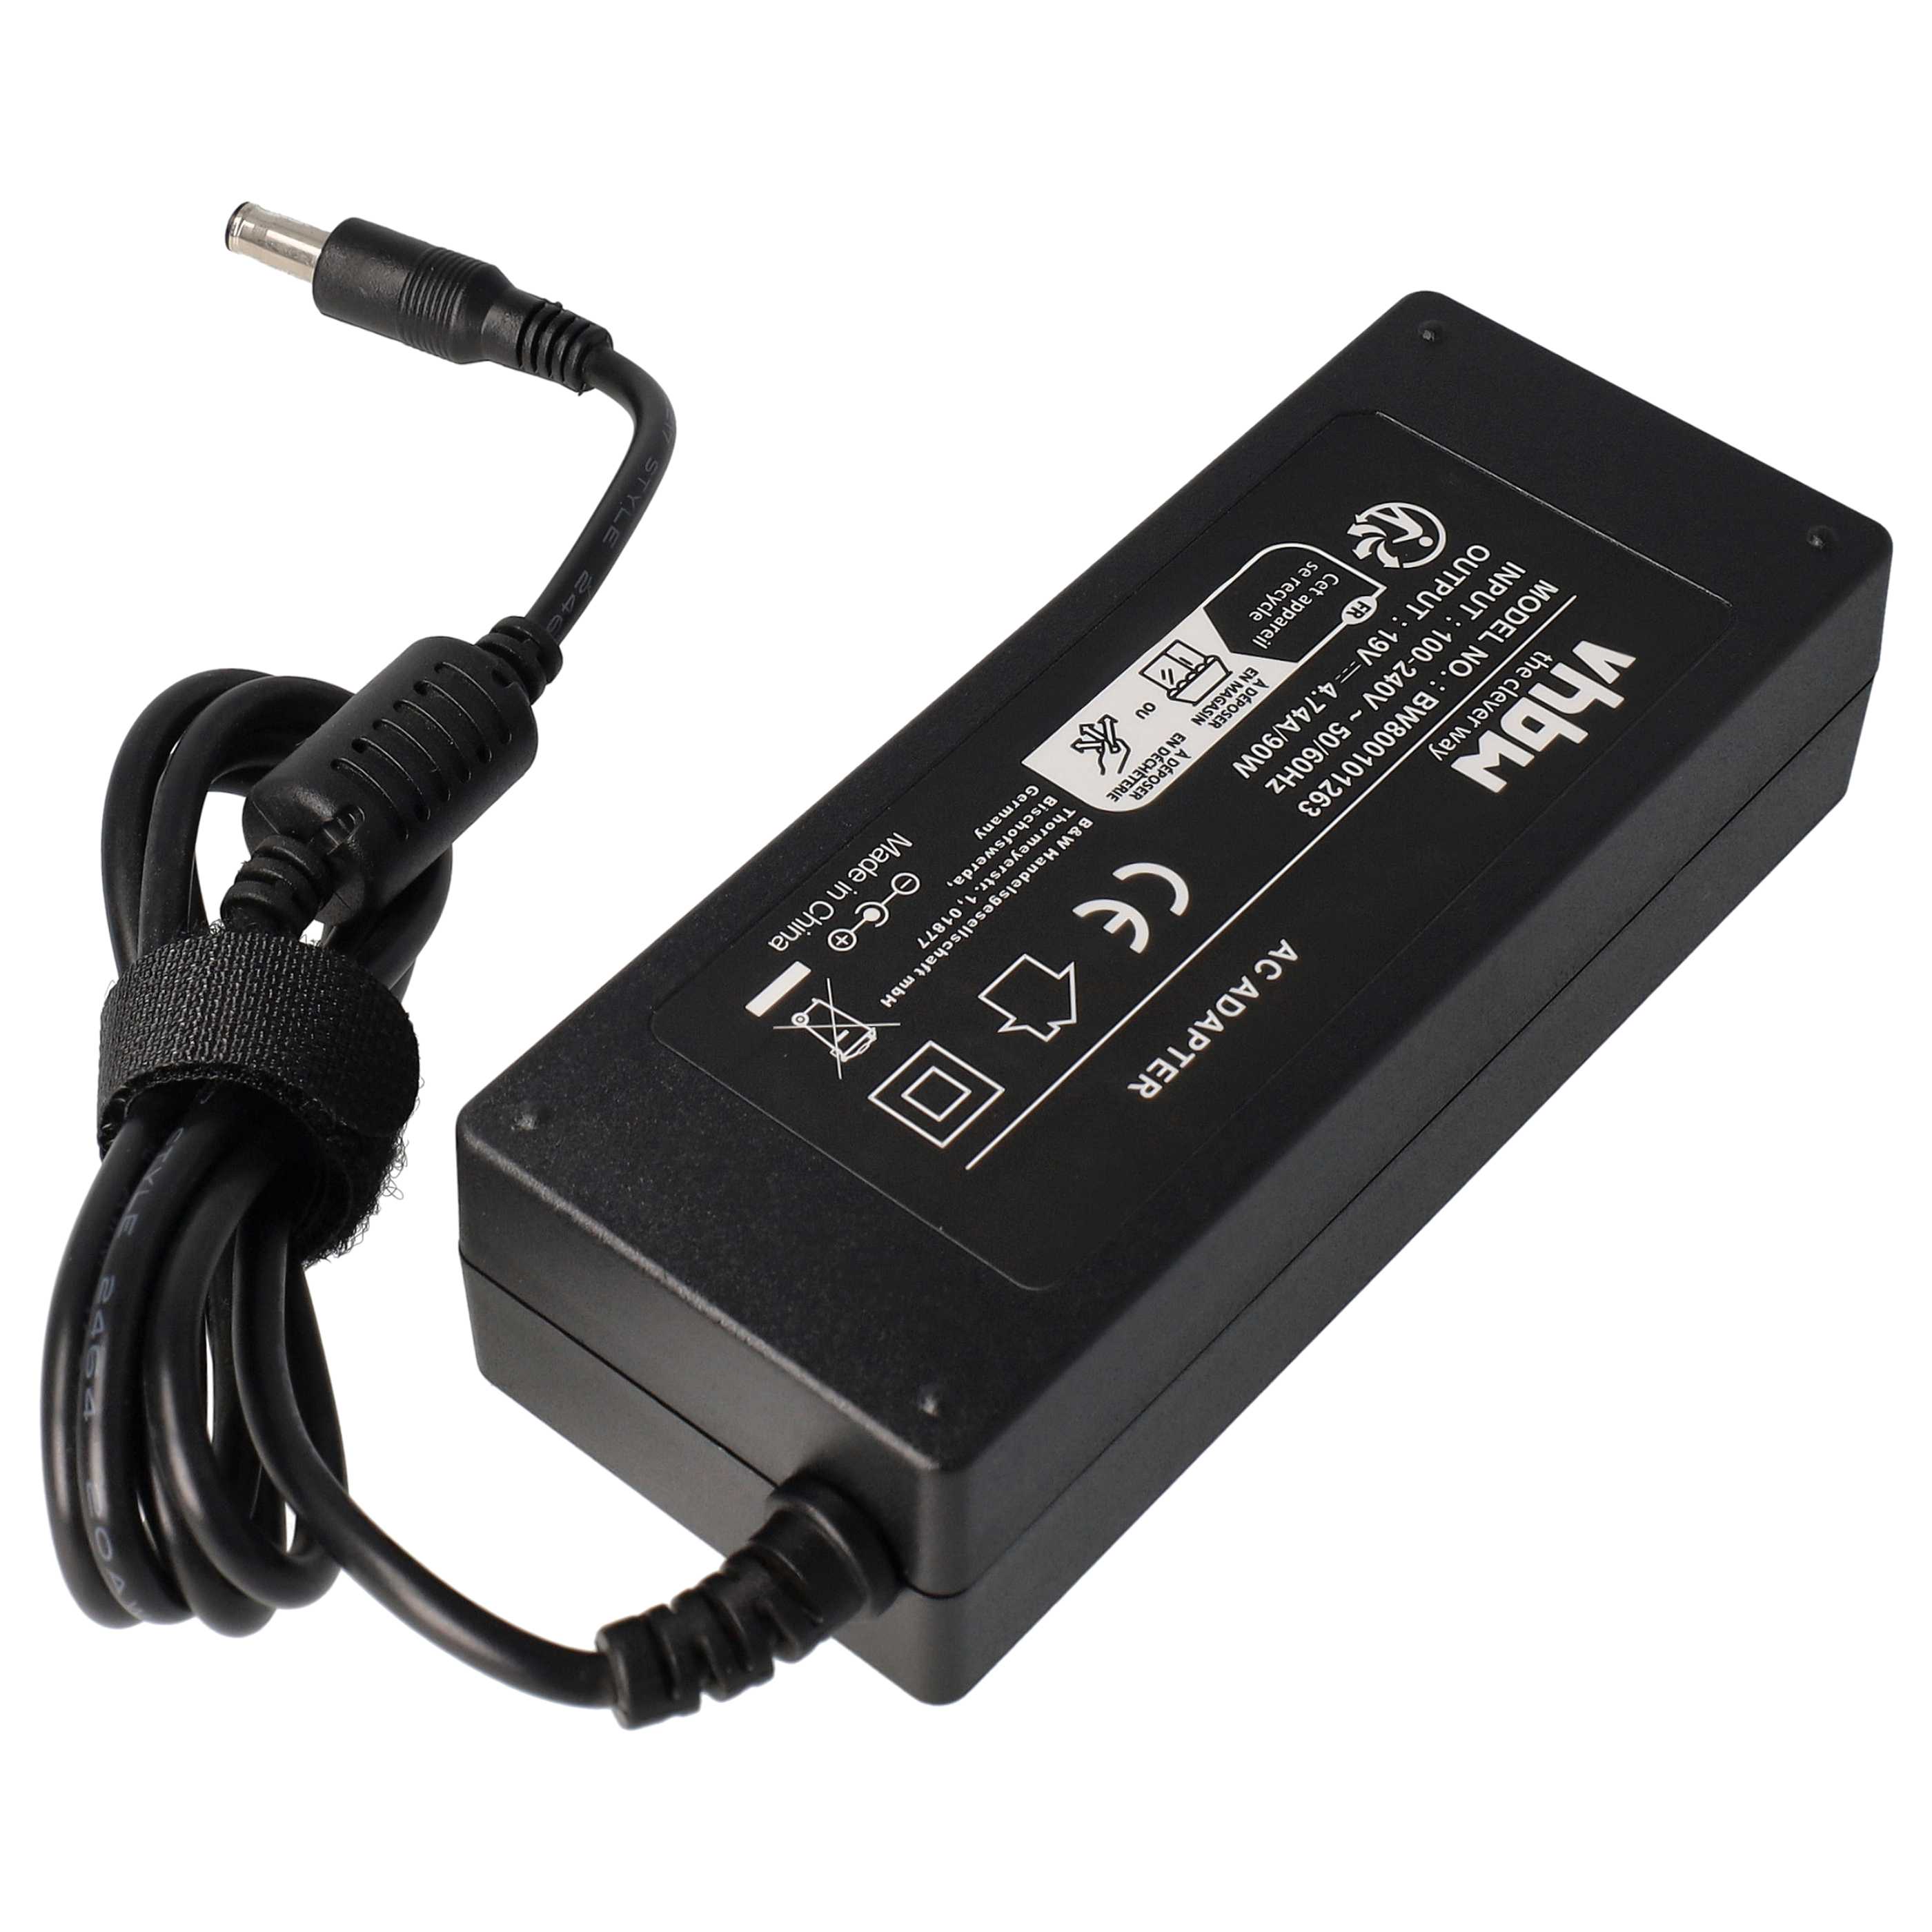 Mains Power Adapter replaces Samsung AD-8019, AA-PA1N90W, AD-9019A, AD-9019 for SamsungNotebook, 90 W